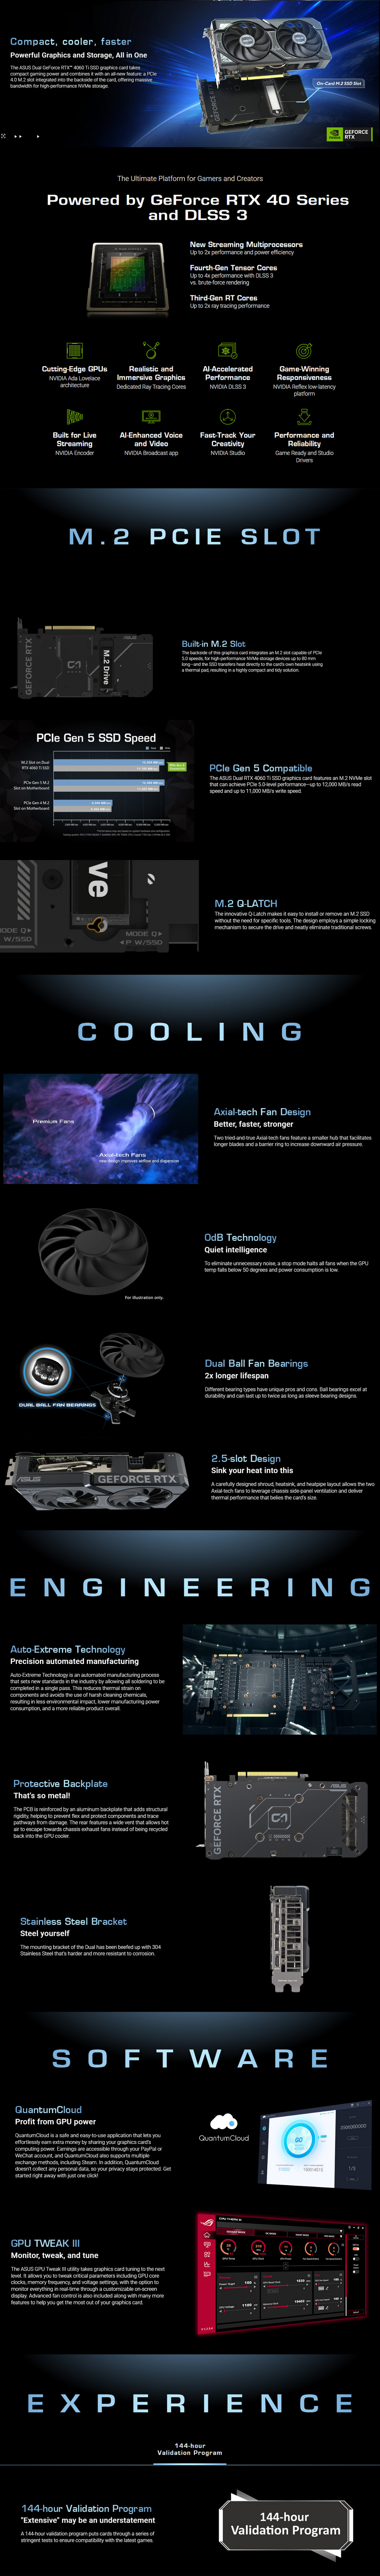 A large marketing image providing additional information about the product ASUS GeForce RTX 4060 Ti Dual SSD OC 8GB GDDR6 - Additional alt info not provided